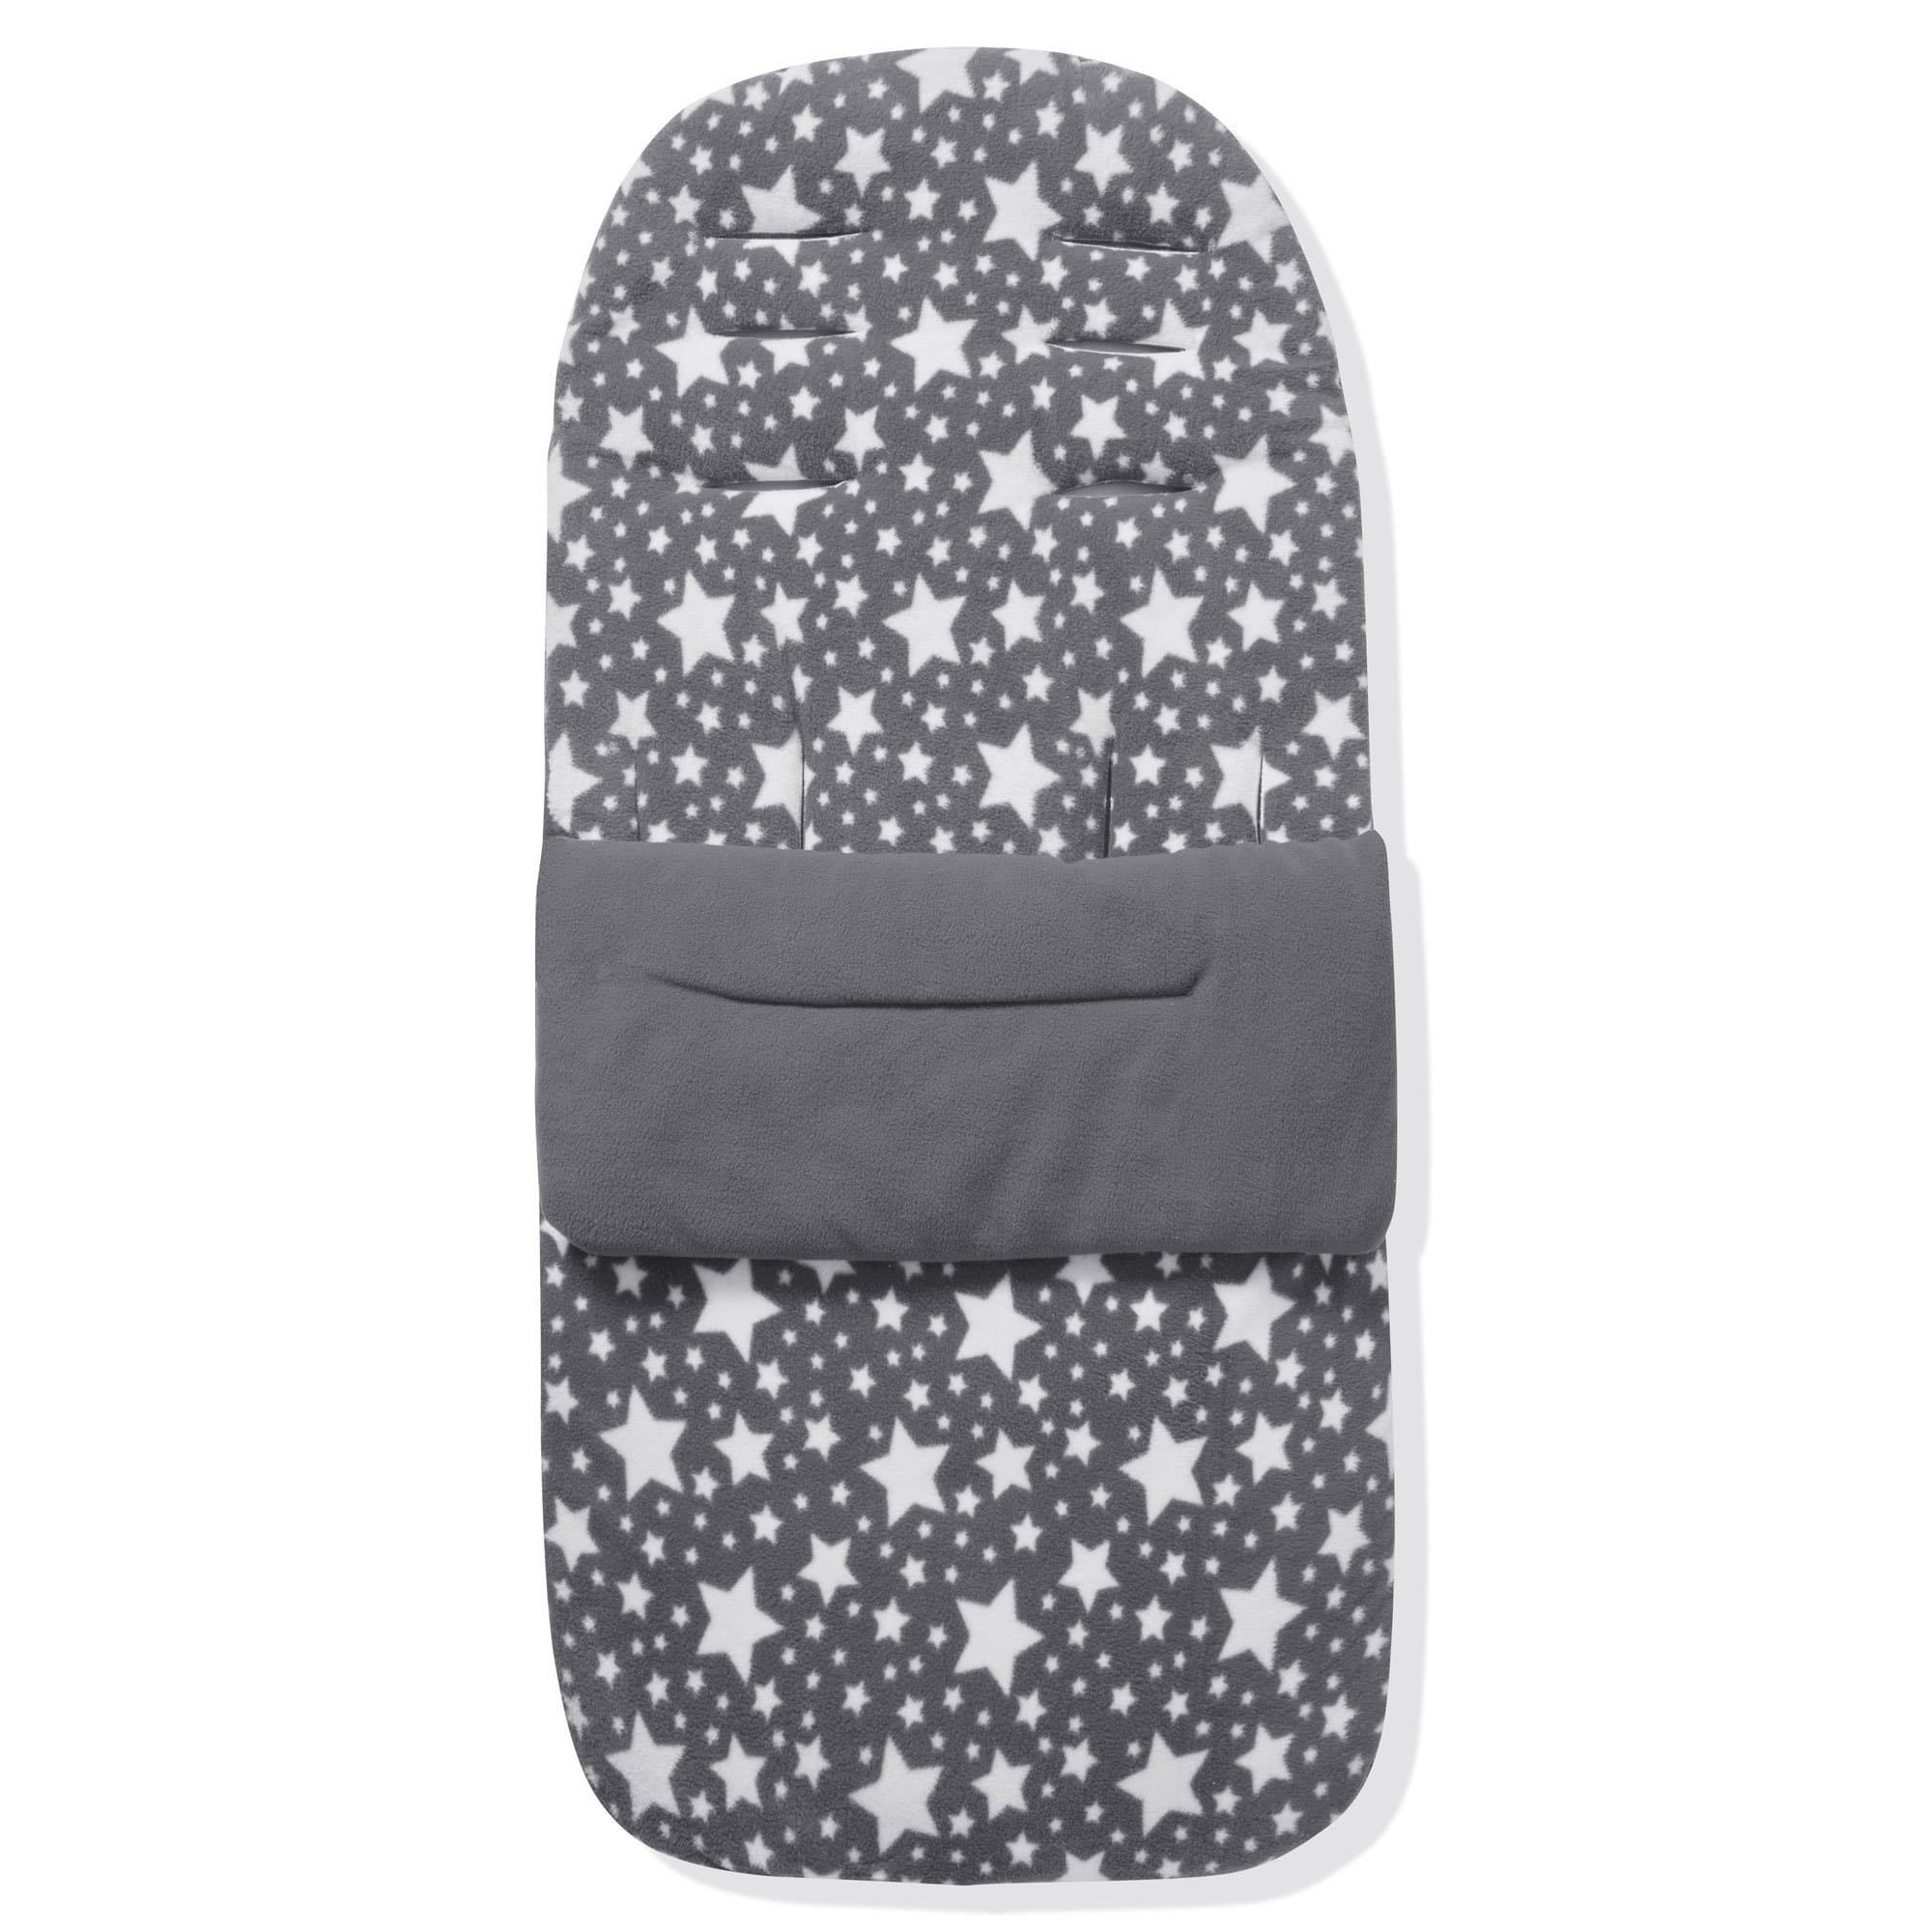 Fleece Footmuff / Cosy Toes Compatible with Maxi Cosi - Grey Star / Fits All Models | For Your Little One